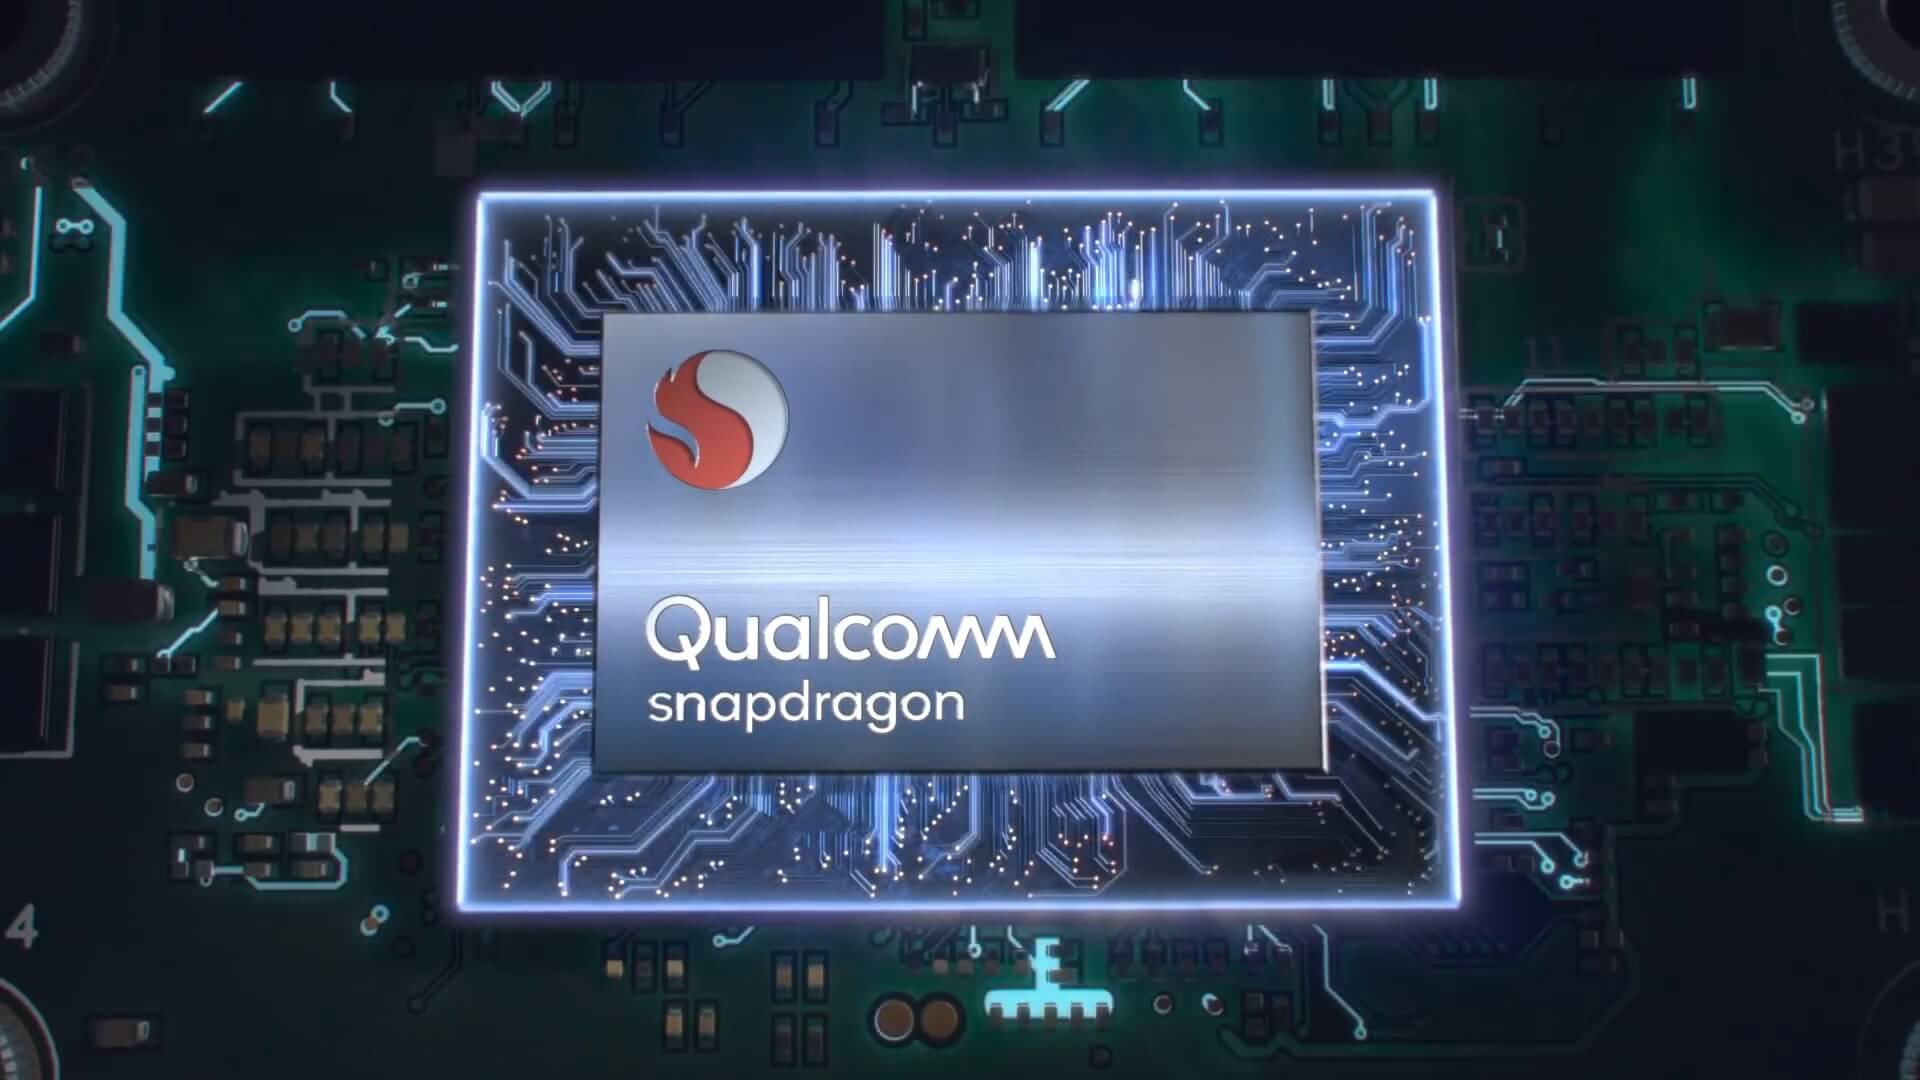 Leaked benchmarks show the Snapdragon 8cx can rival Intel's i5-8250U